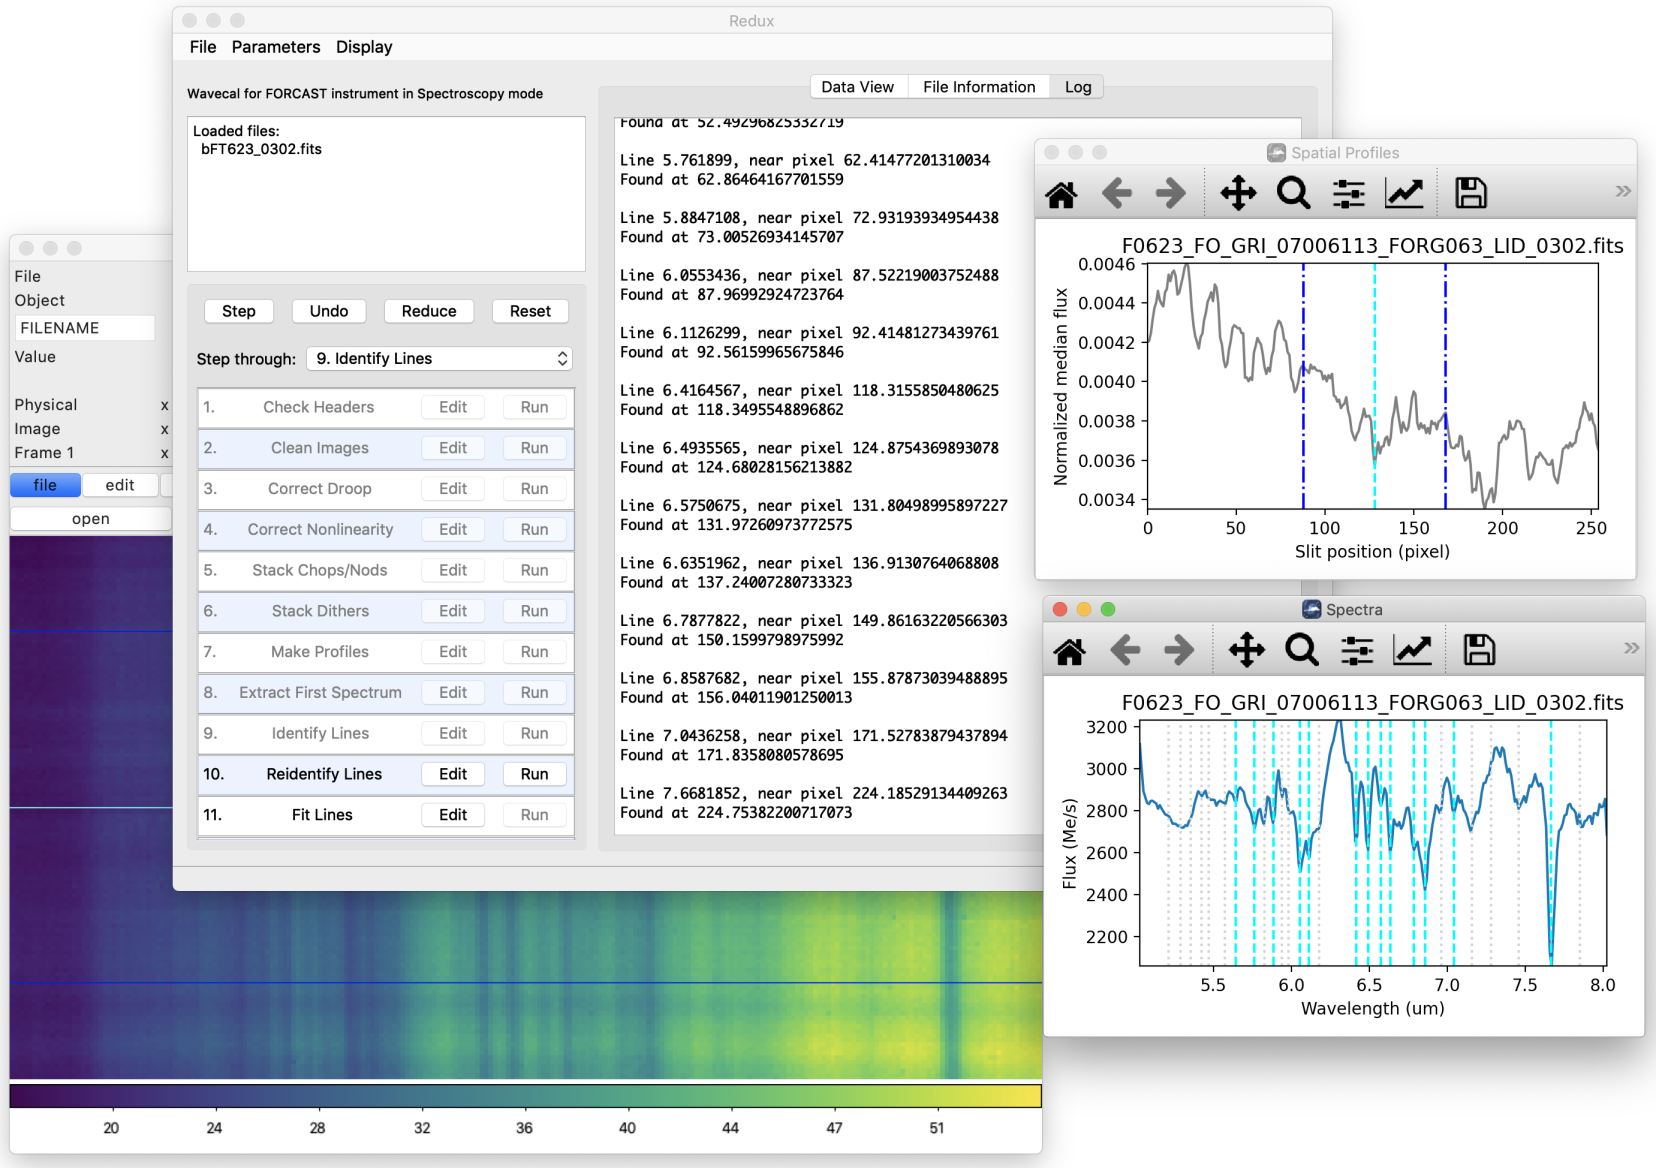 The Redux GUI window, several spectral plot displays with lines marked, and a DS9 window showing a spectral image.